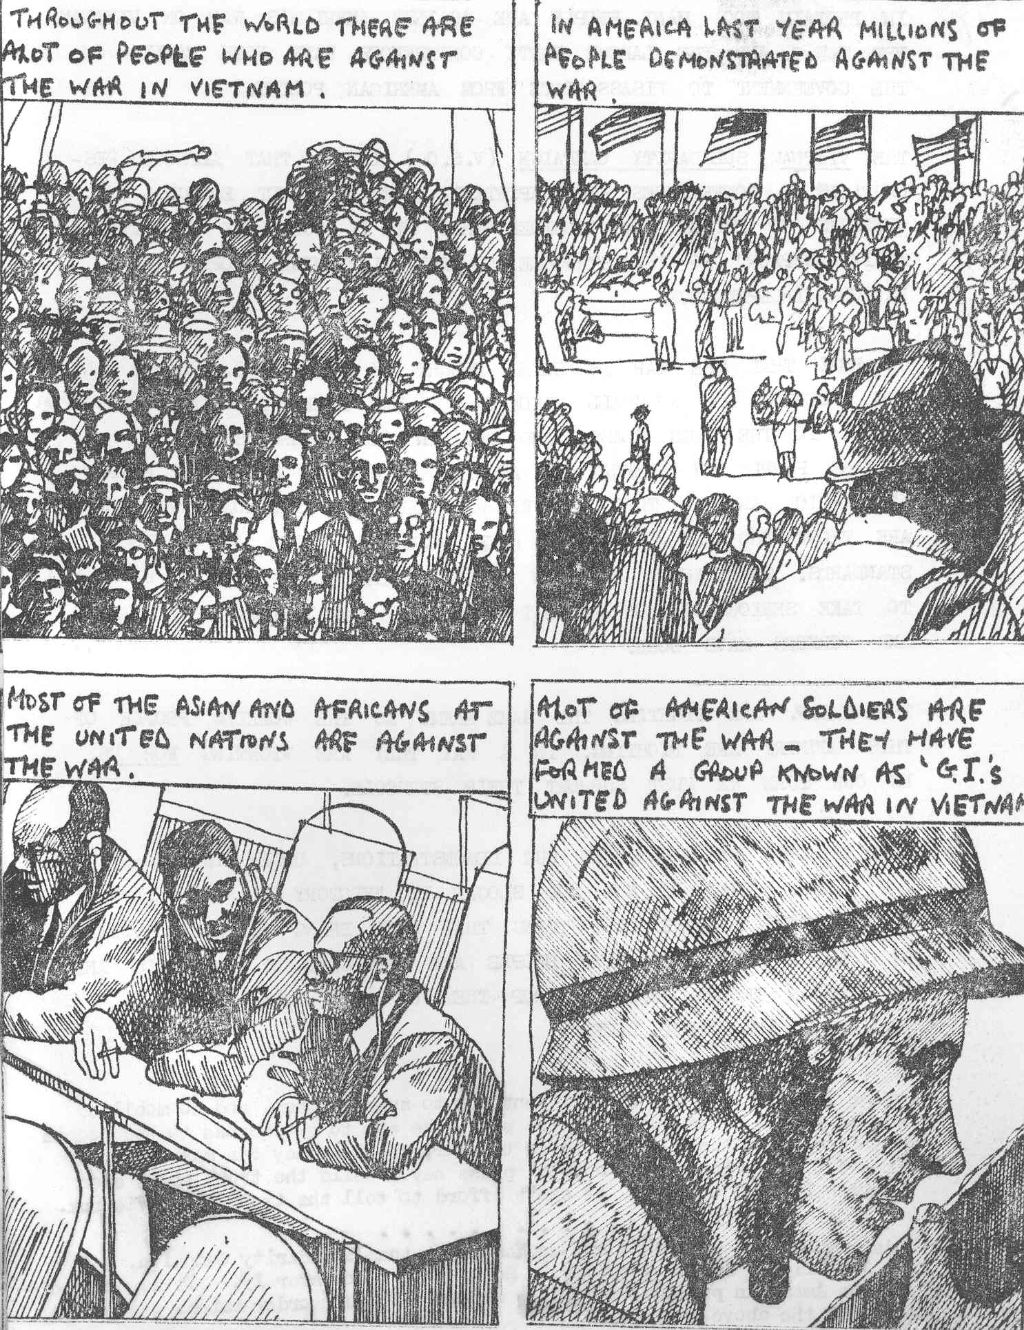 Page from cartoon strip 'Vietnam', late 1960s